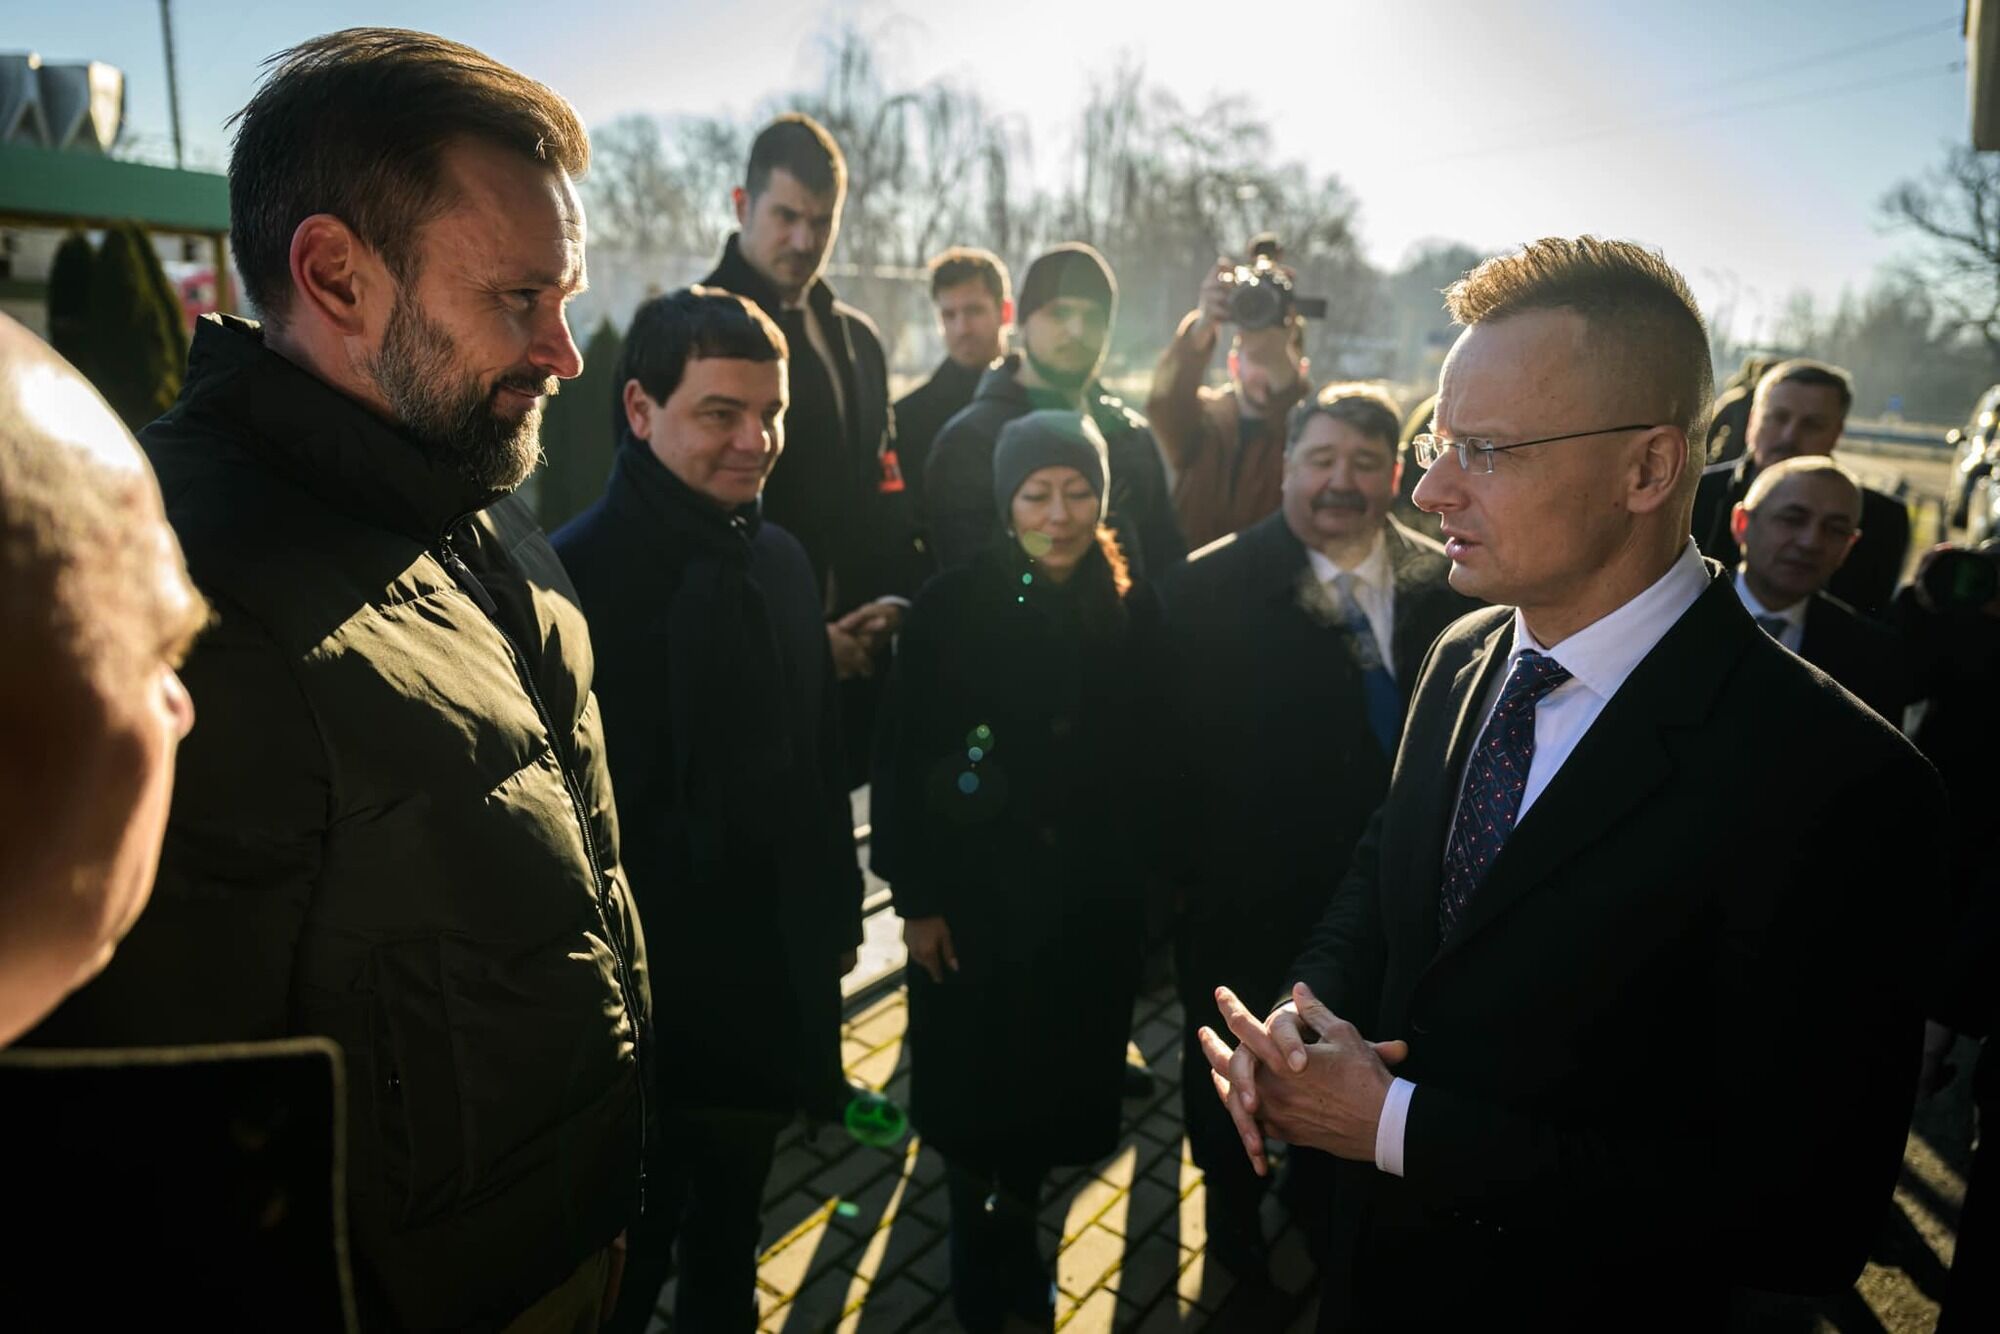 Szijjártó shared the photo with the head of the Transcarpathian Regional State Administration.